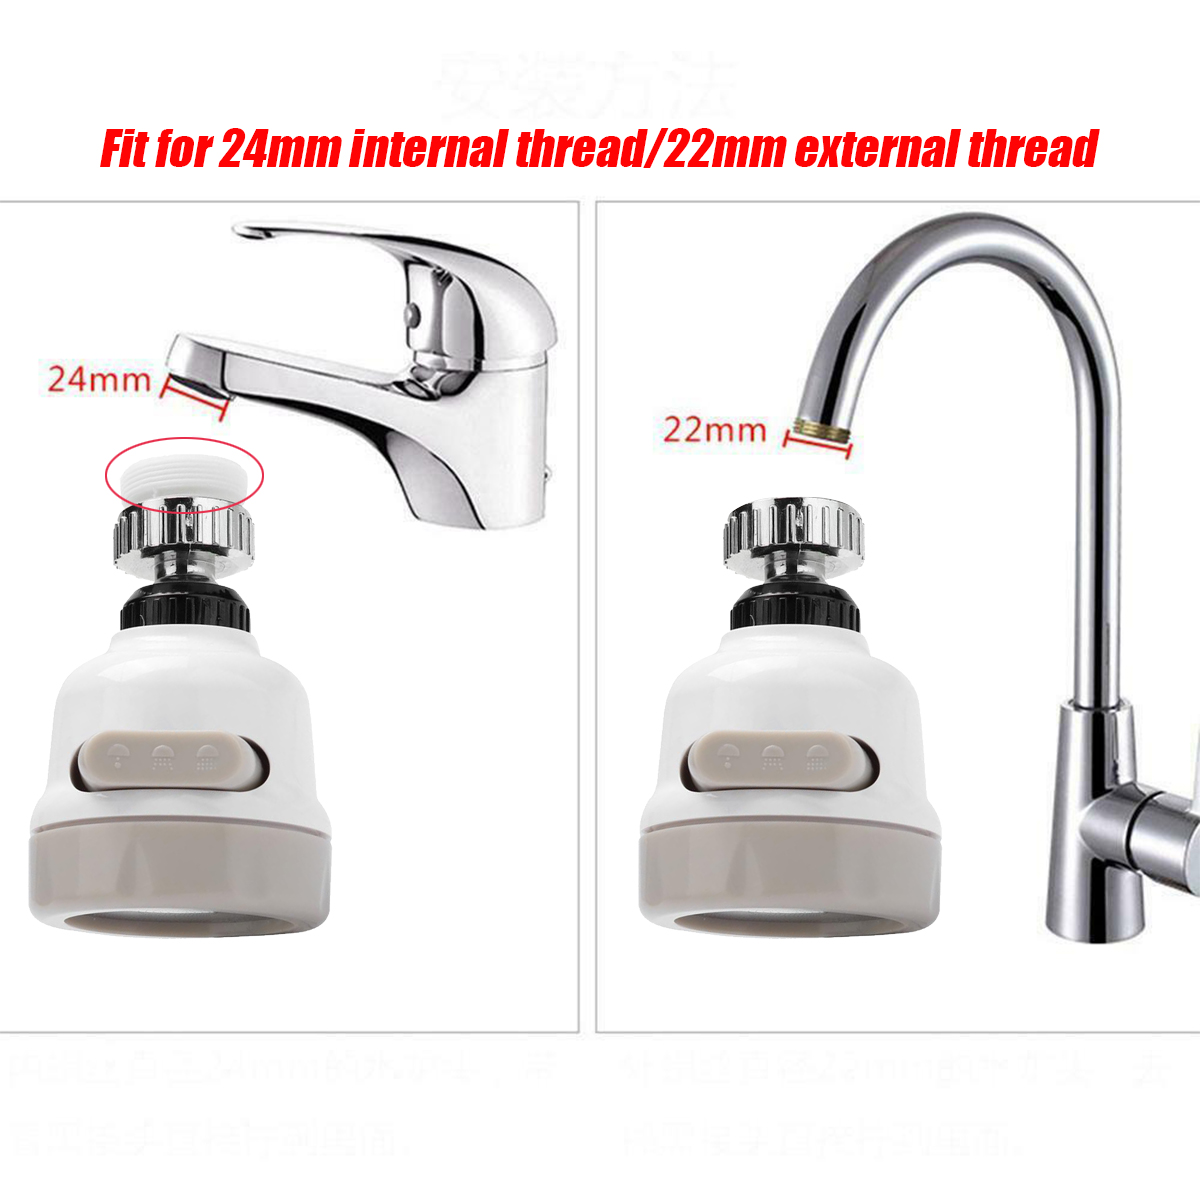 MSKJ Booster Shower Kitchen Home Water Filter Tap Head 360 Degree Rotating Faucet Nozzle